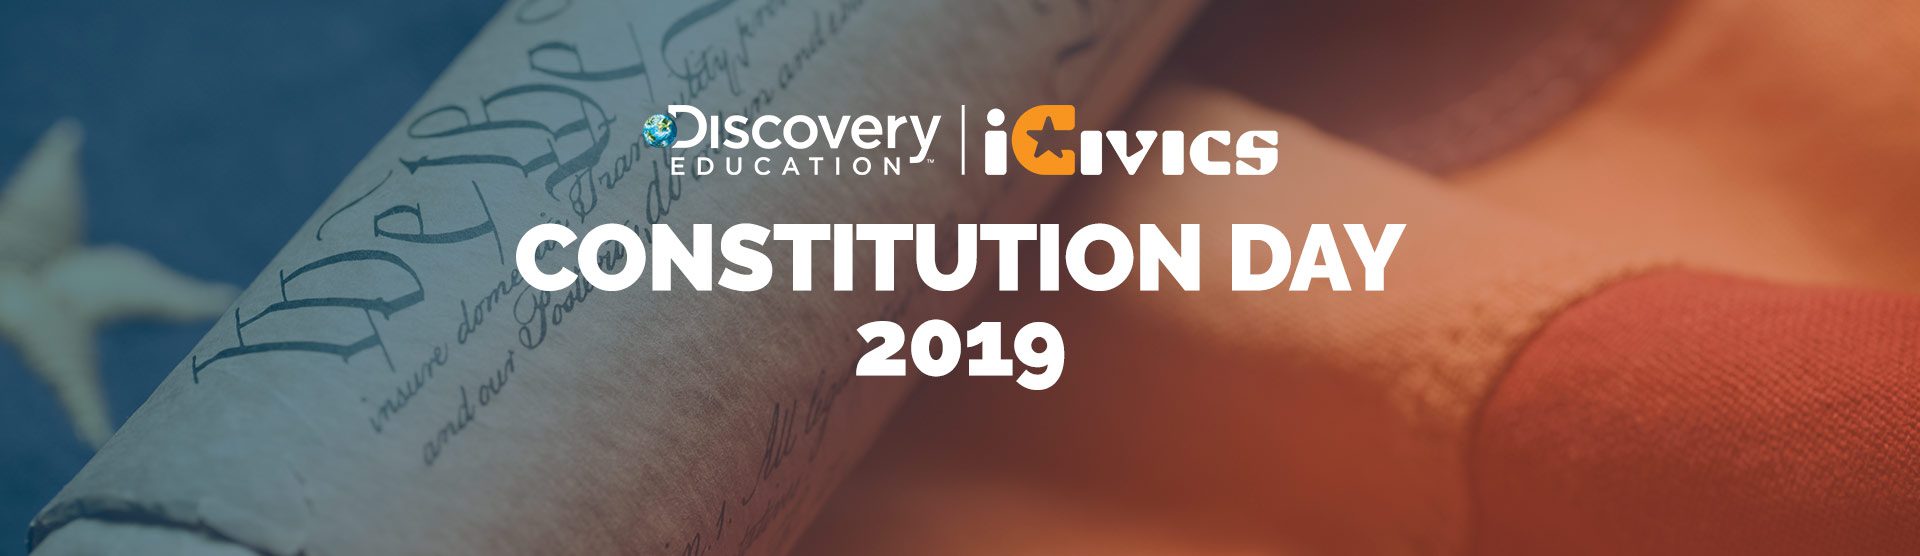 constitution day 2019 icivics wp header